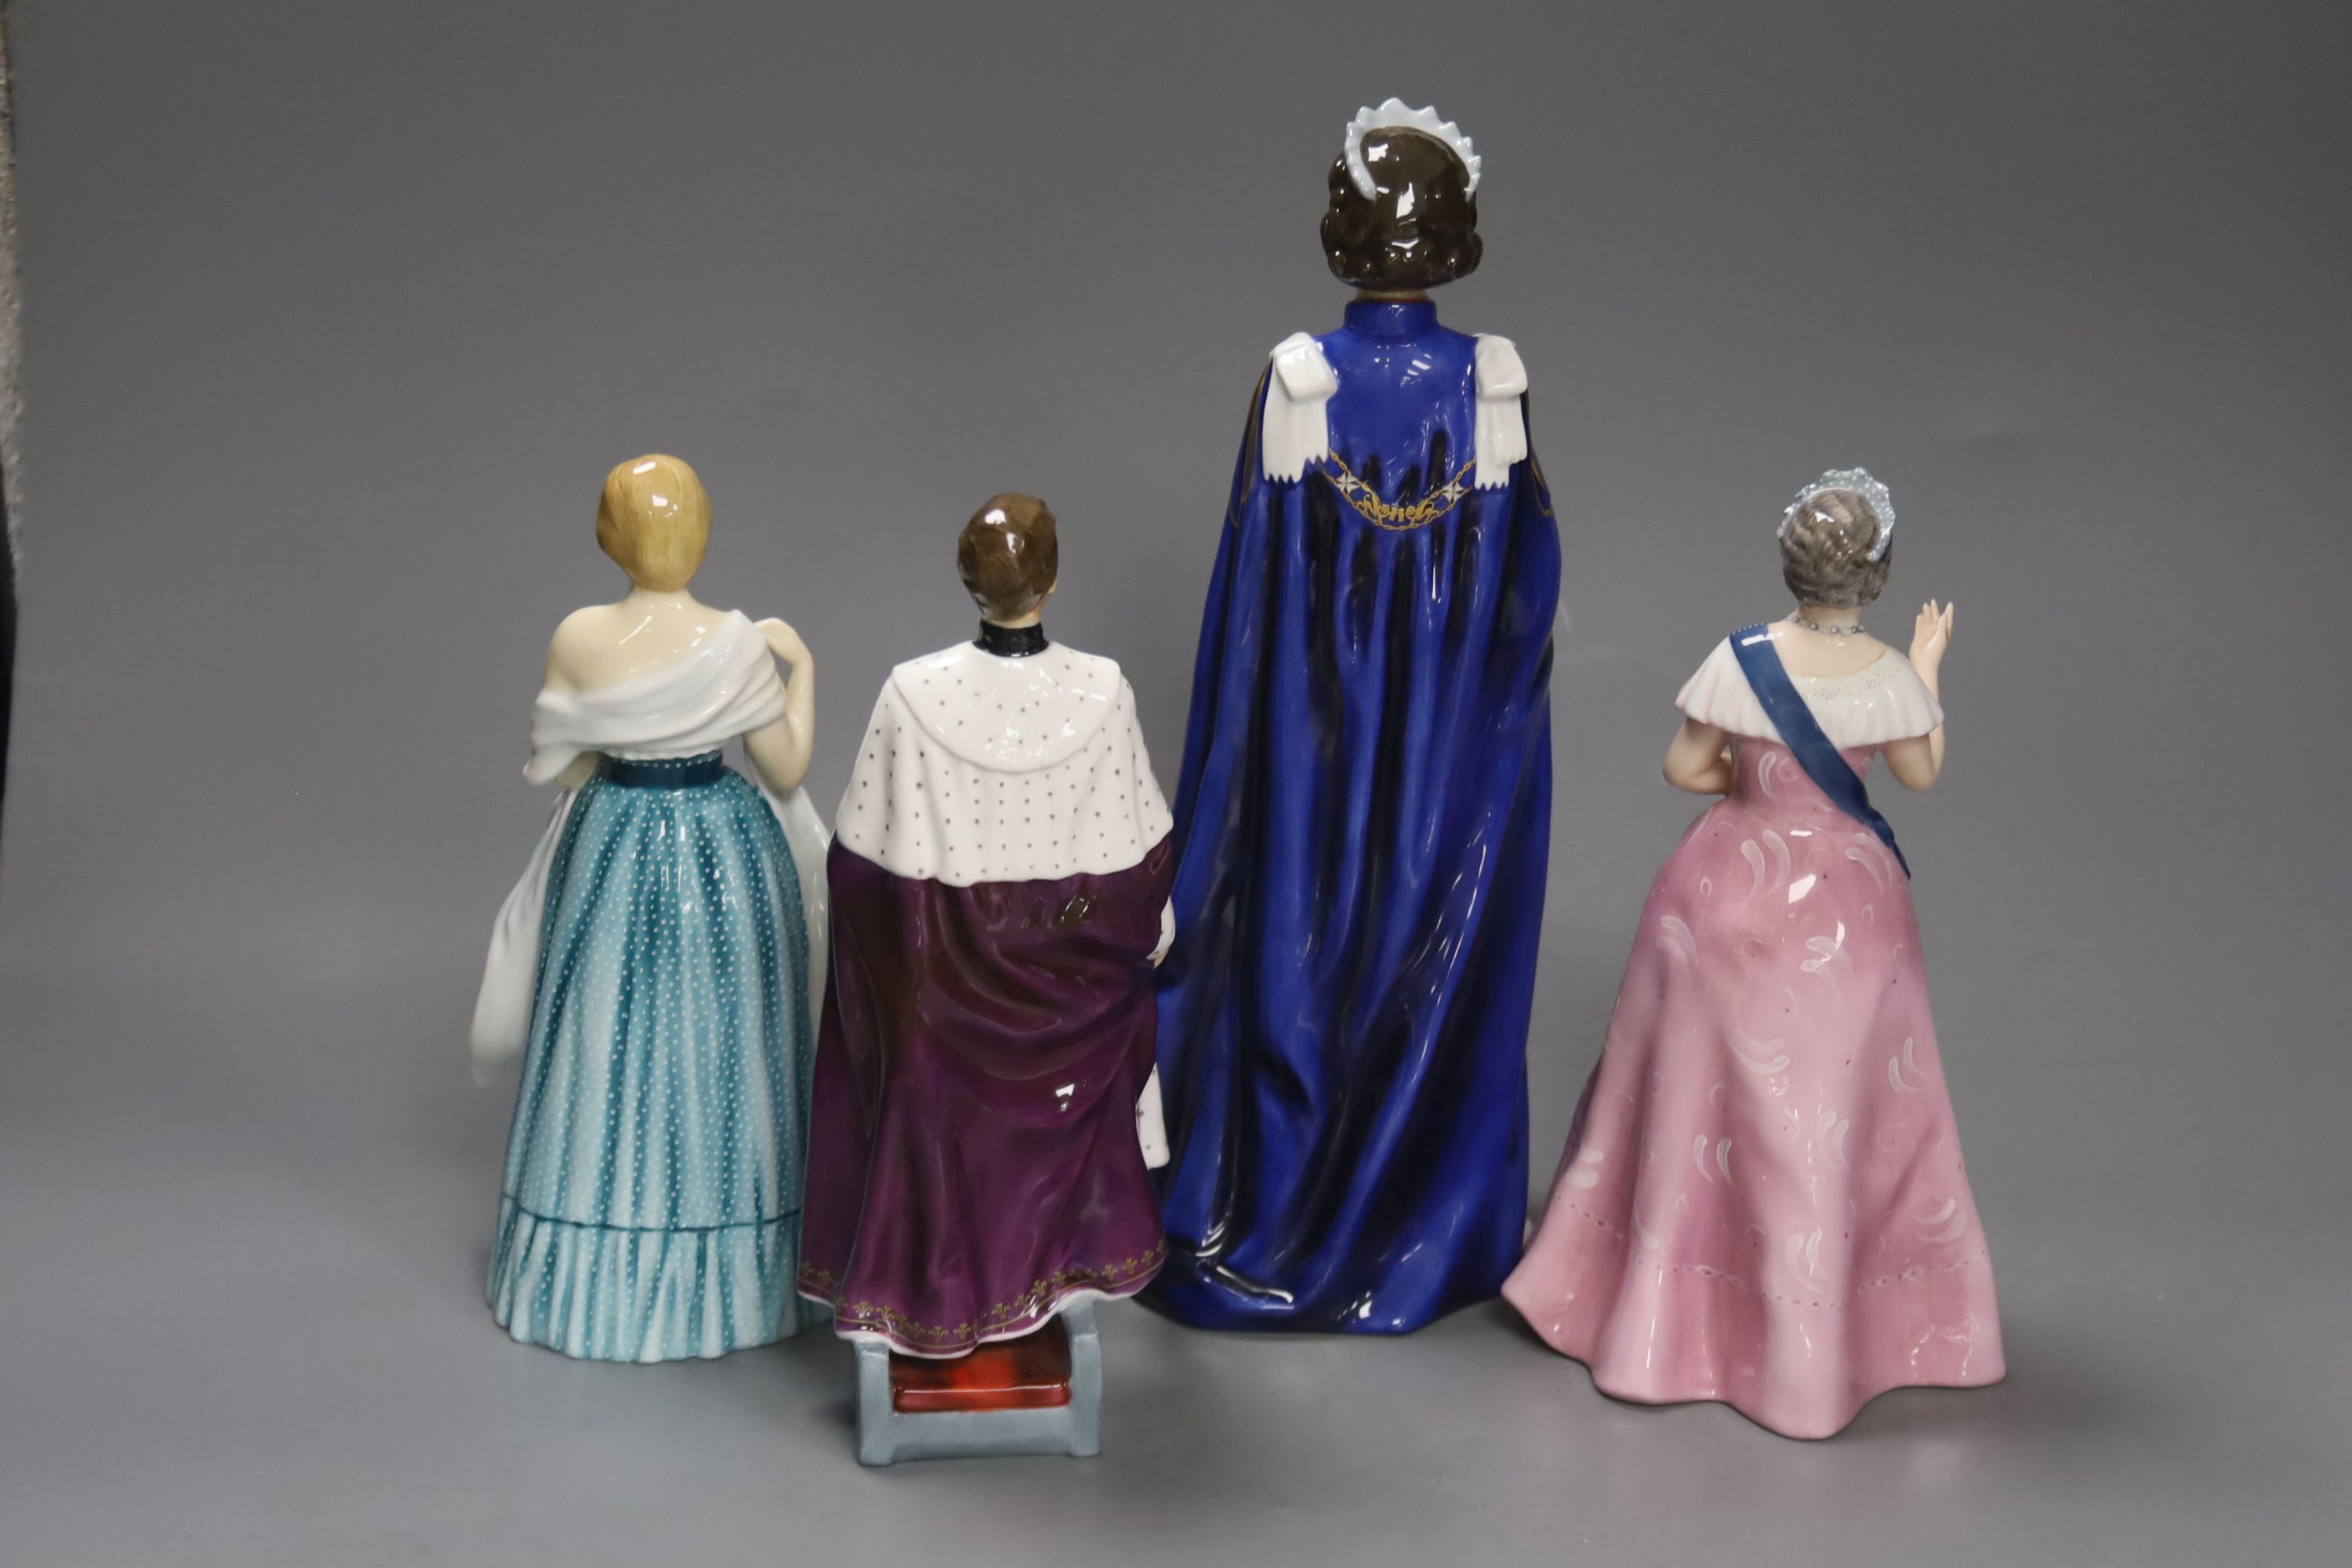 A Royal Doulton figure, 'HM Queen Elizabeth II 30th Anniversary of the Coronation', no. 129/2500 and three other Royal figures